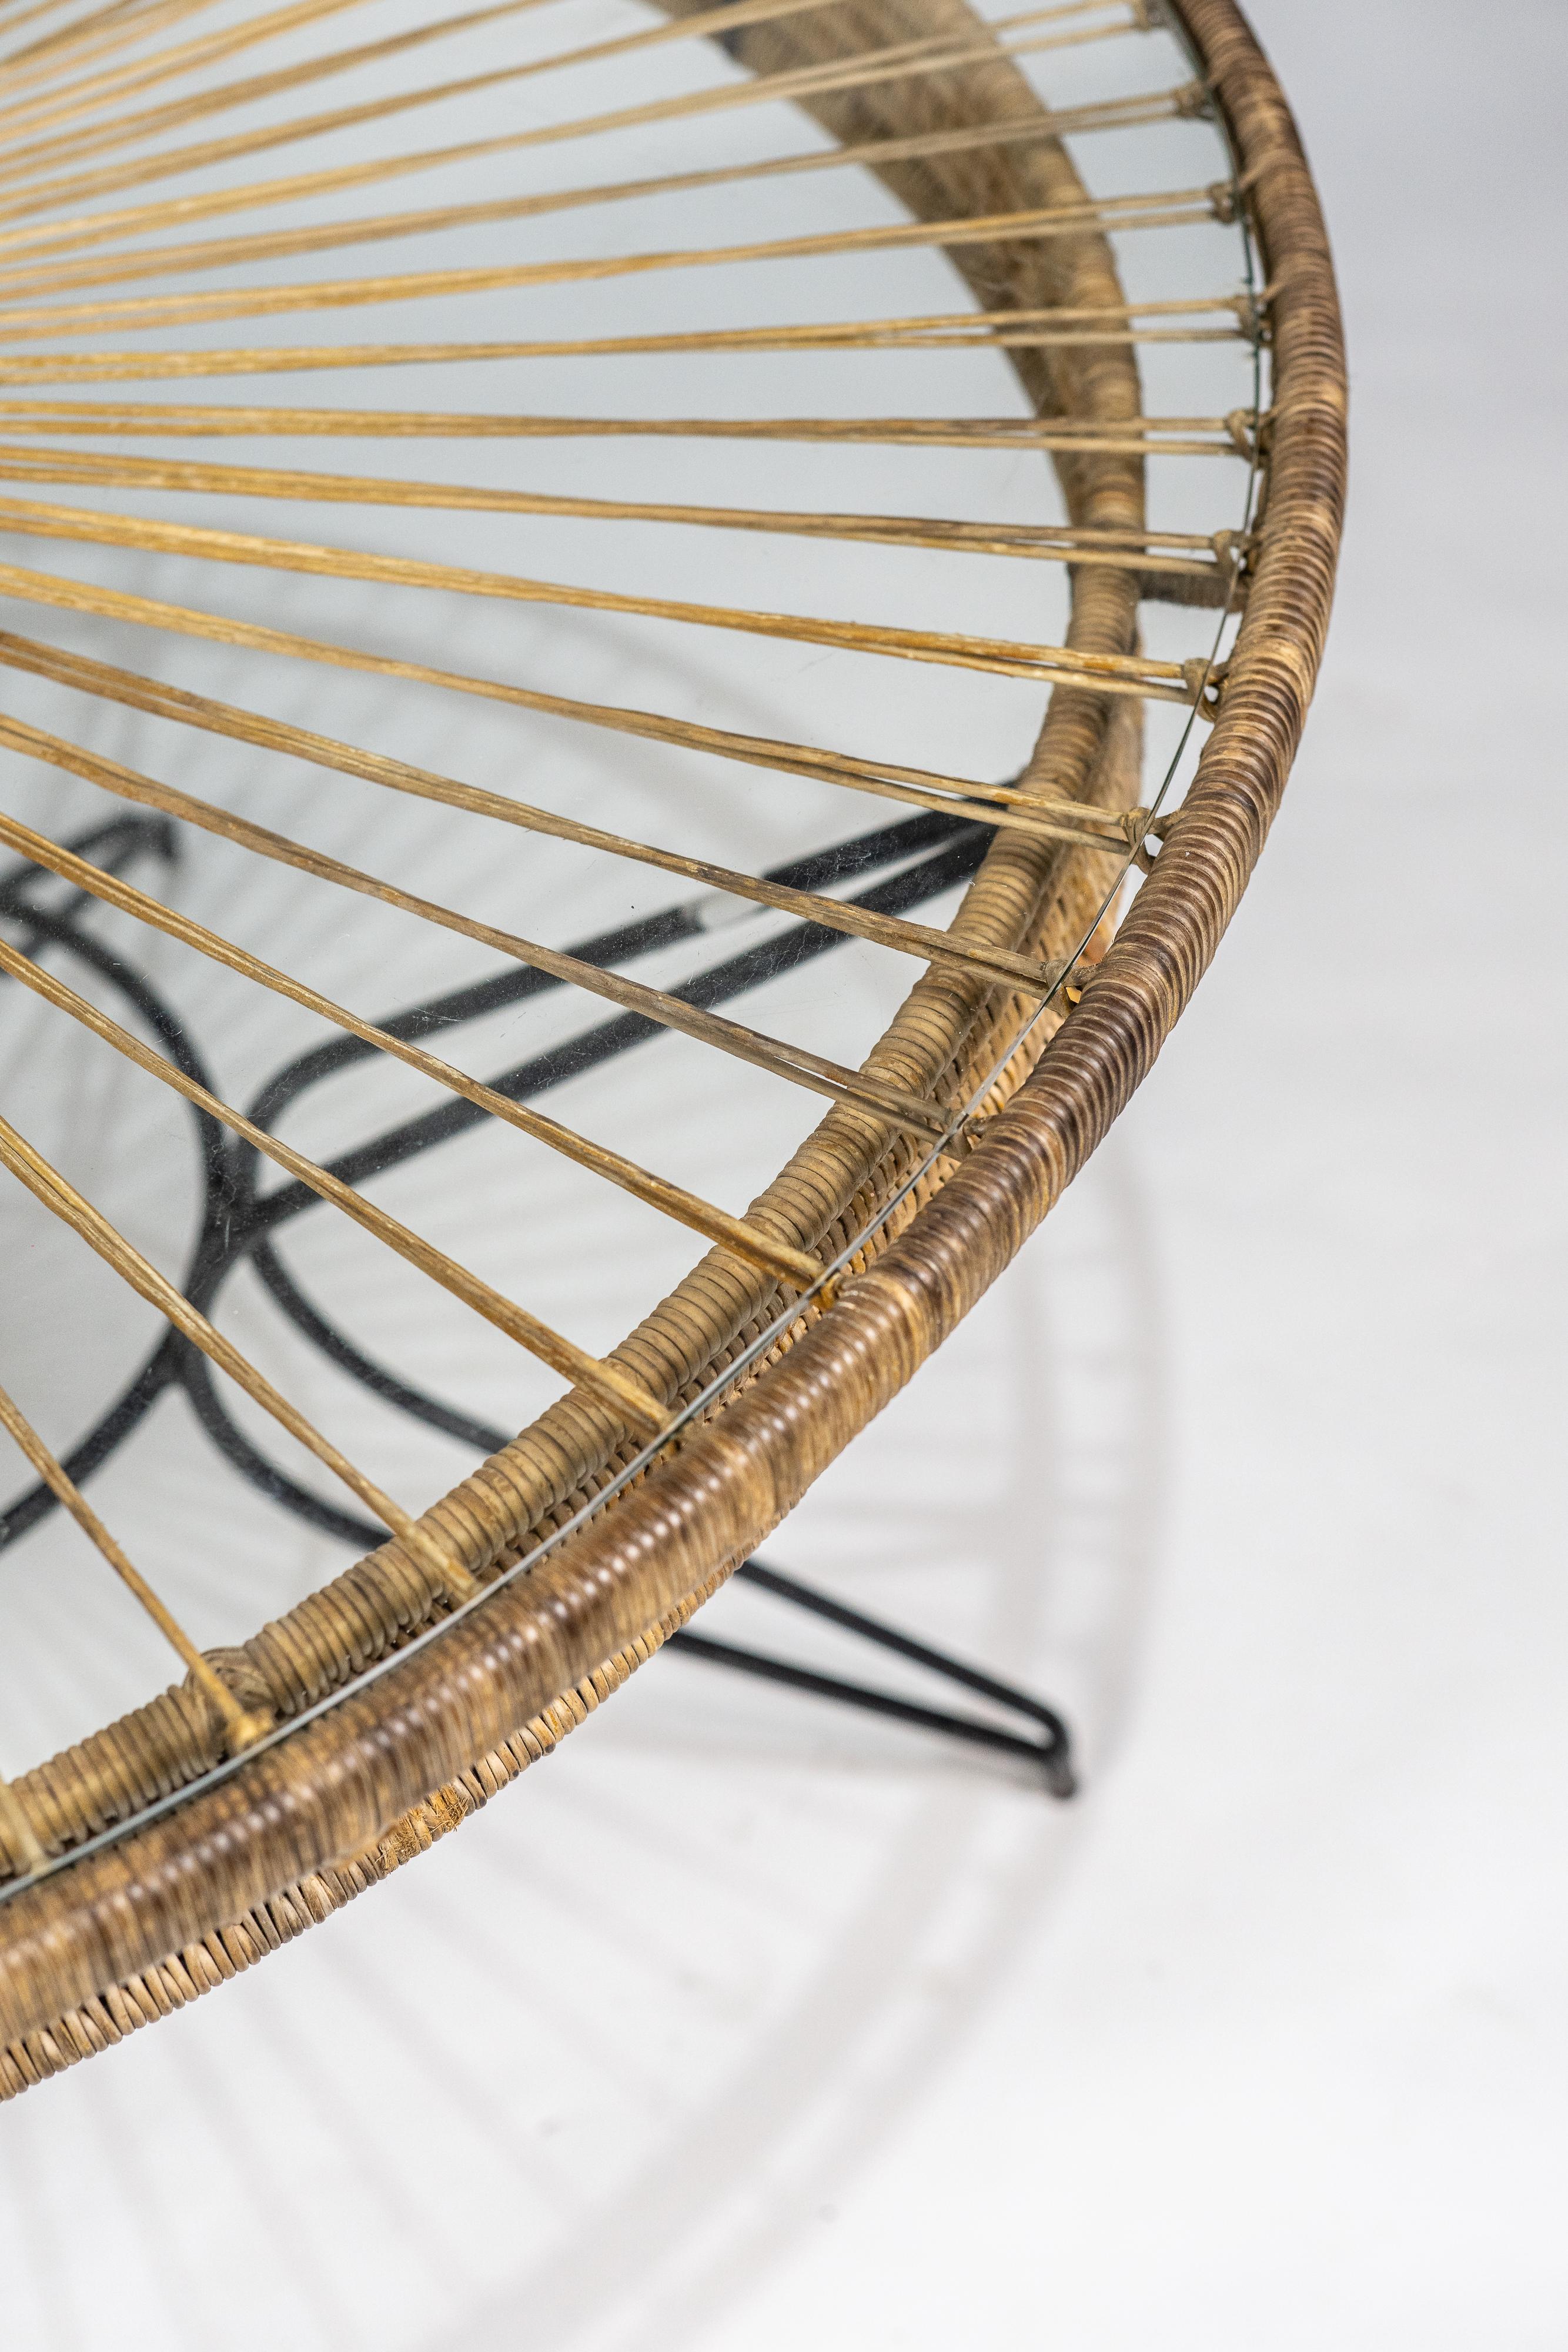 Wicker Carlo Hauner. Round dining table with glass, c. 1950 For Sale